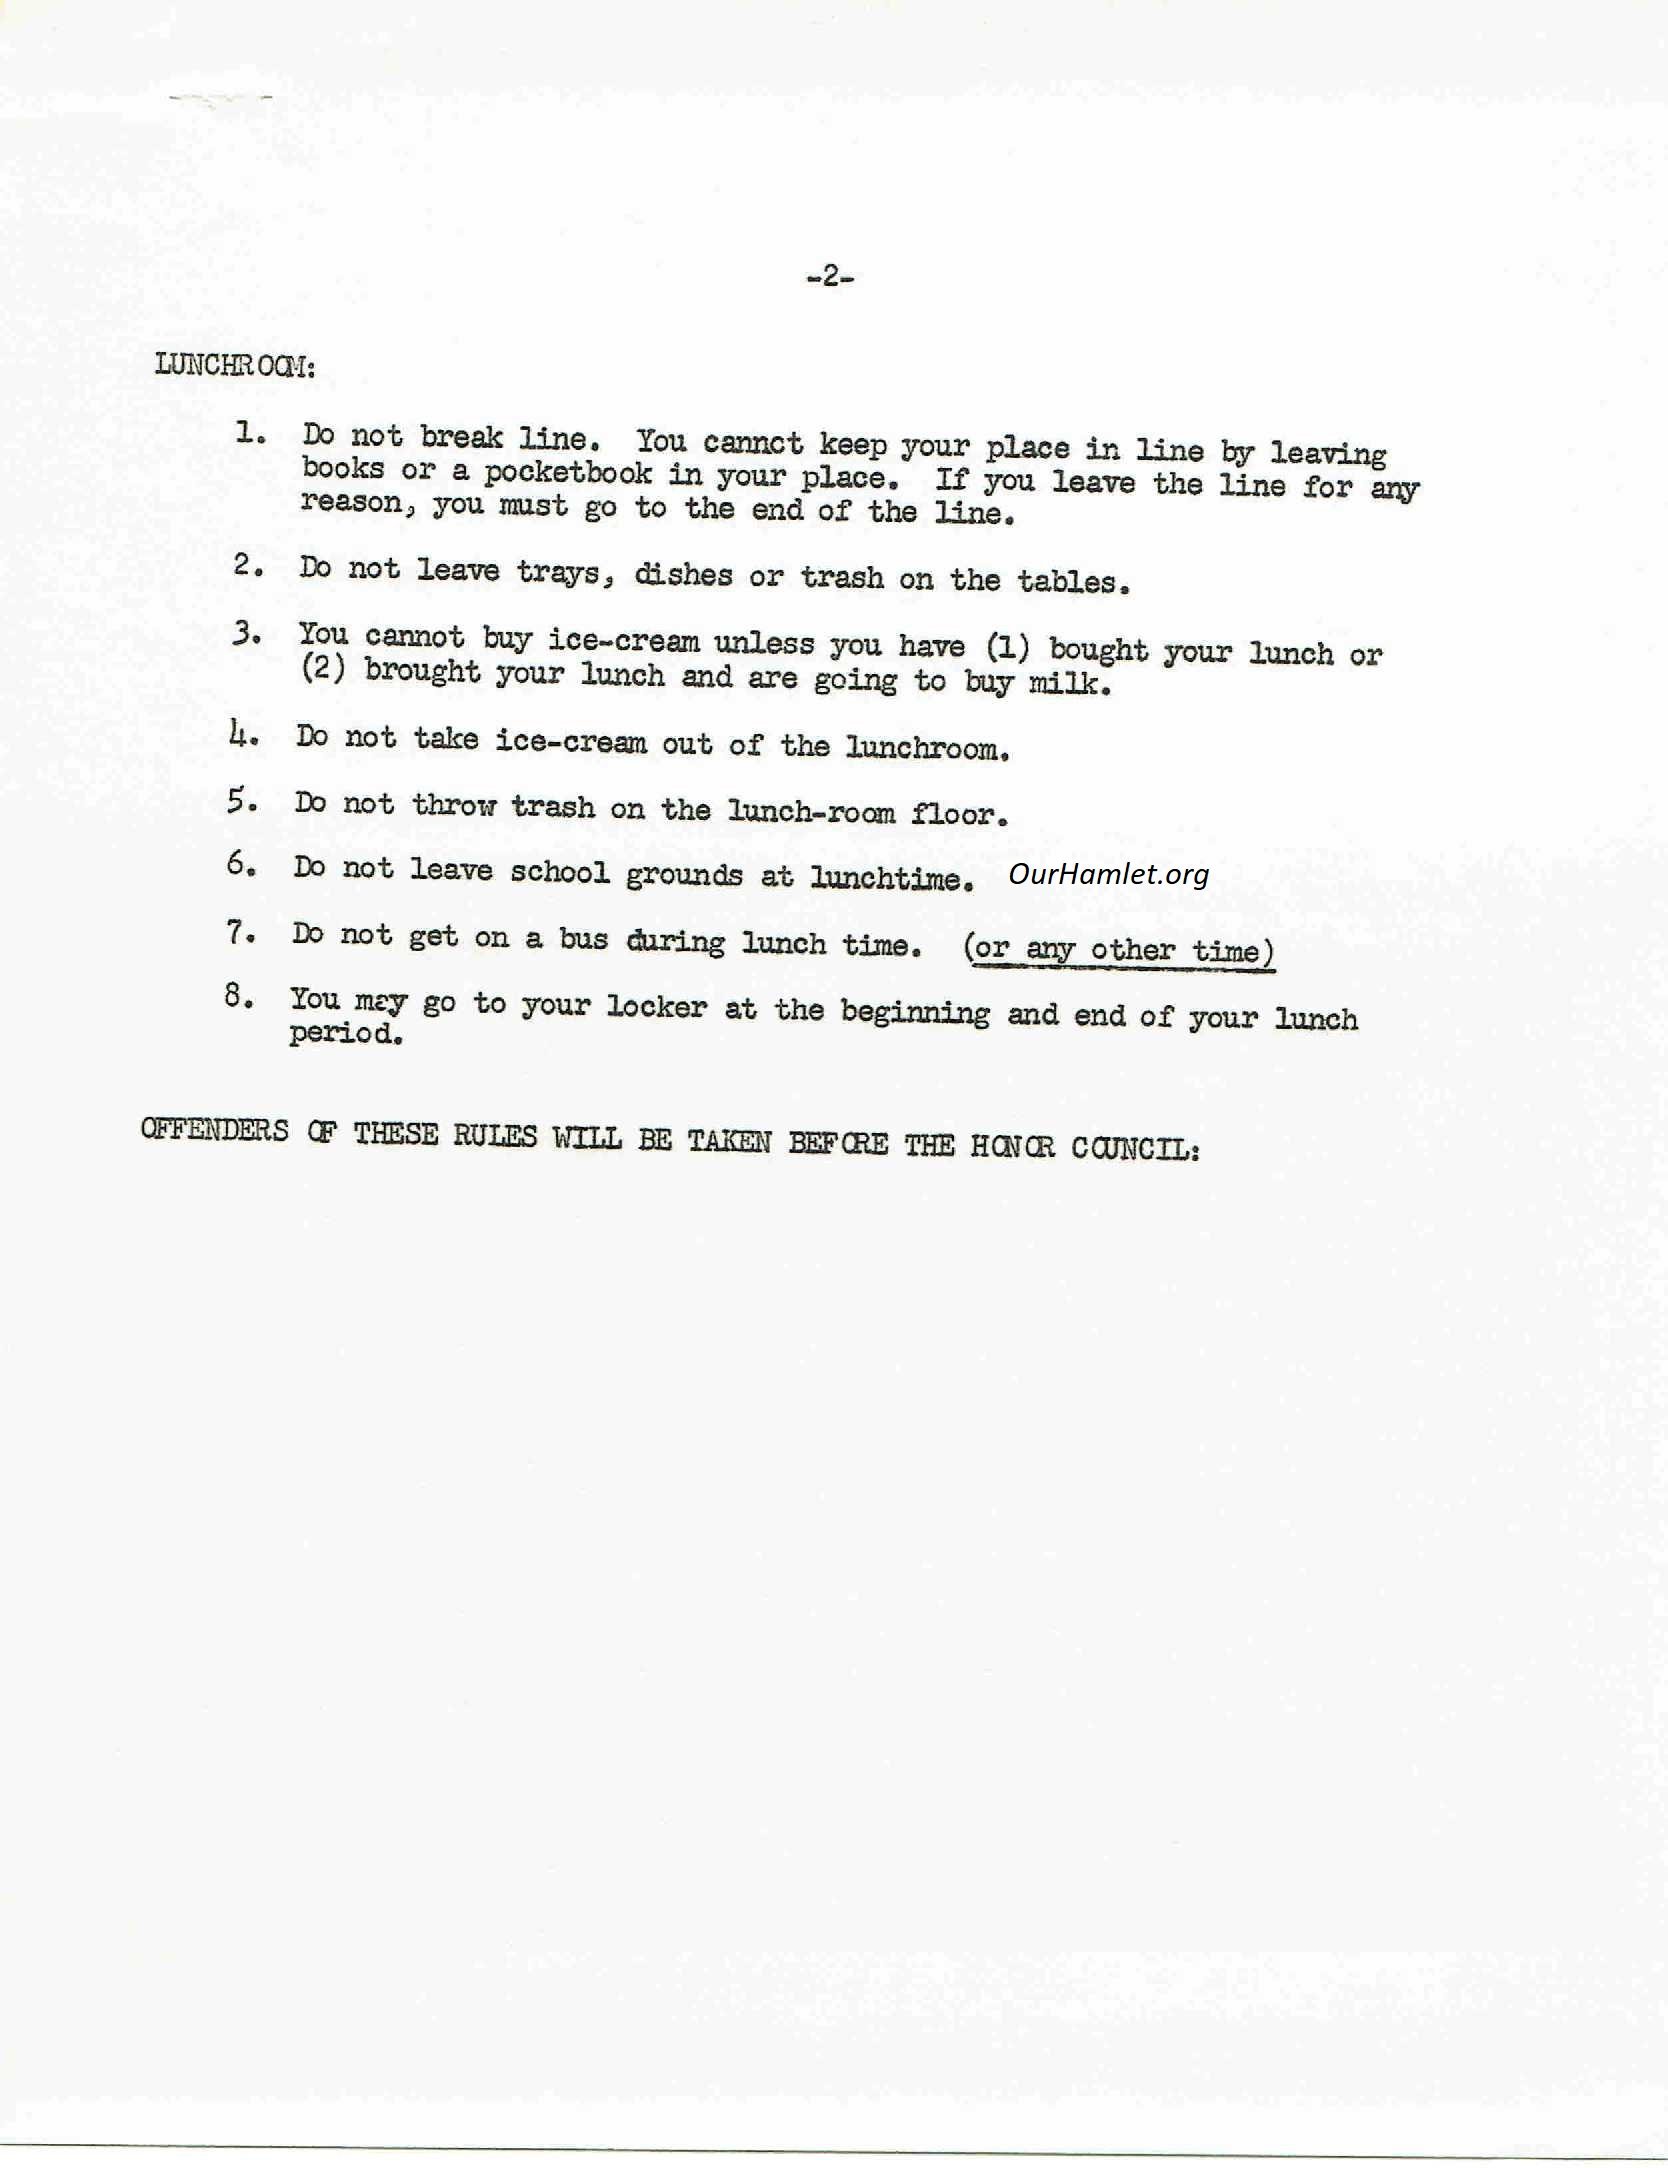 HHS Rules and Procedures 1968_2 OH.jpg